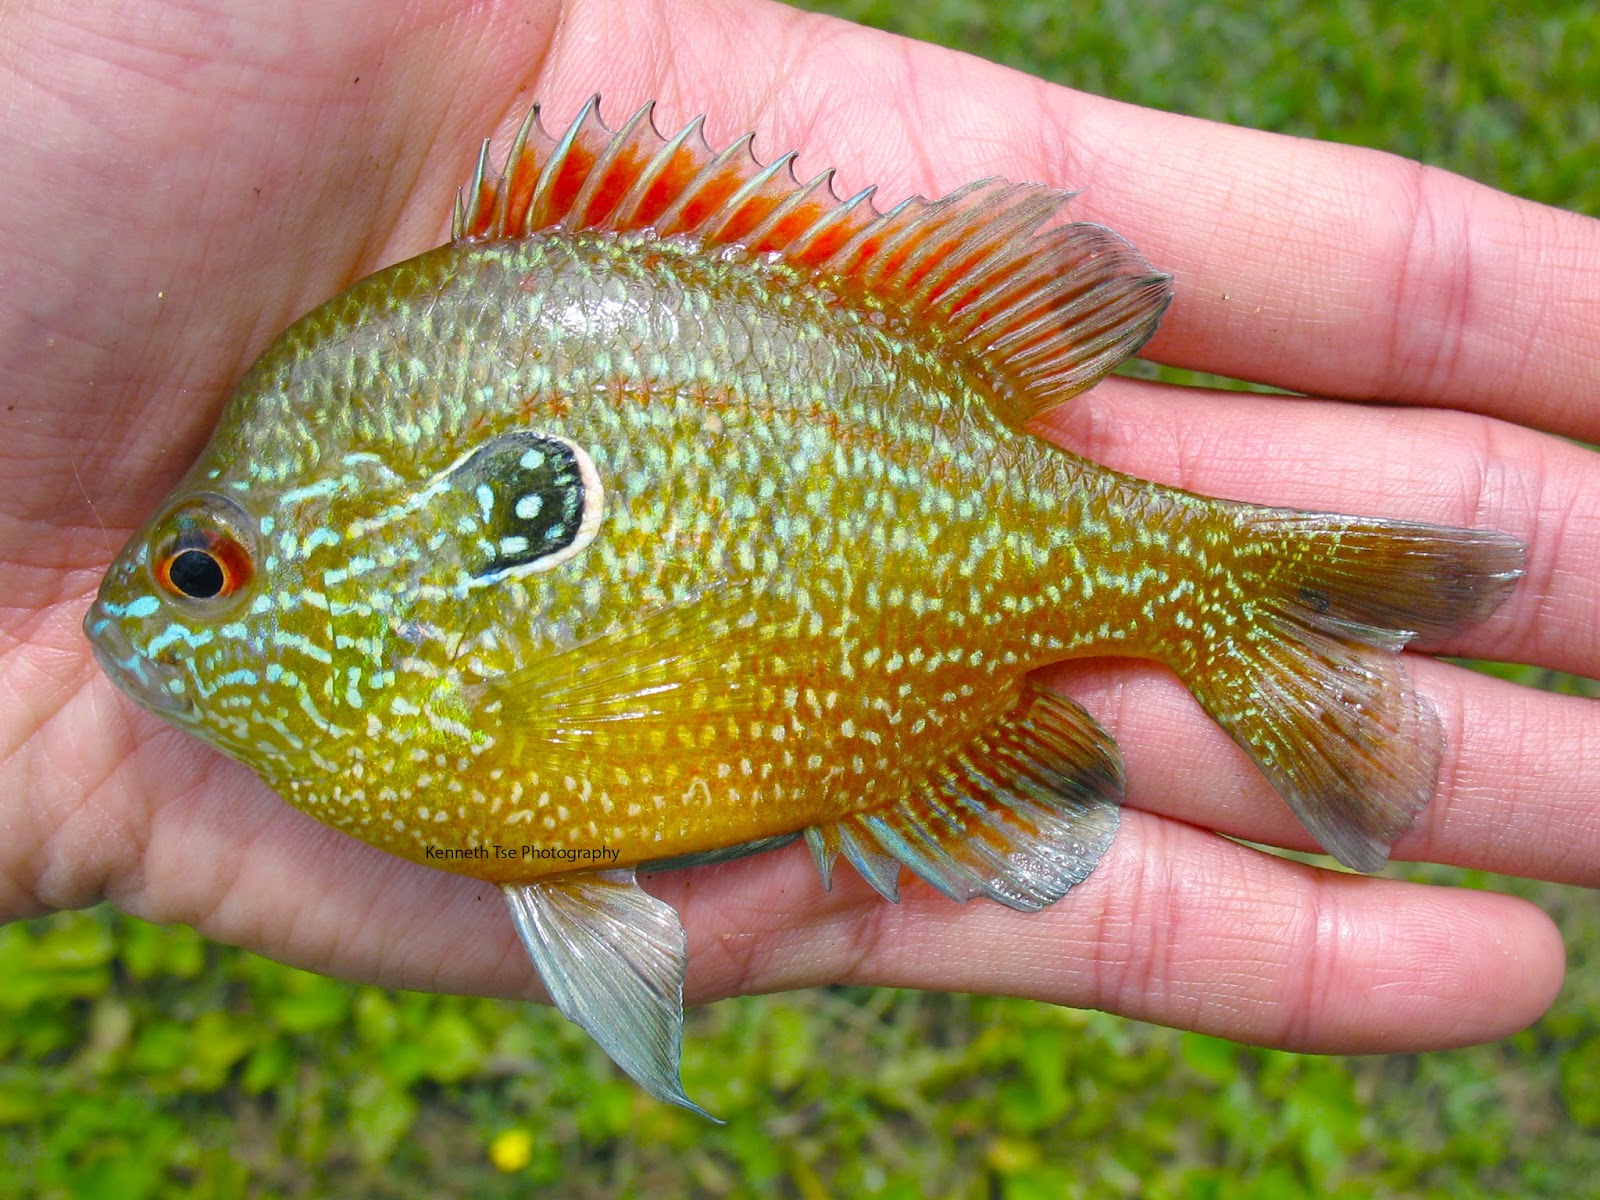 What is the difference between a bluegill and a sunfish?